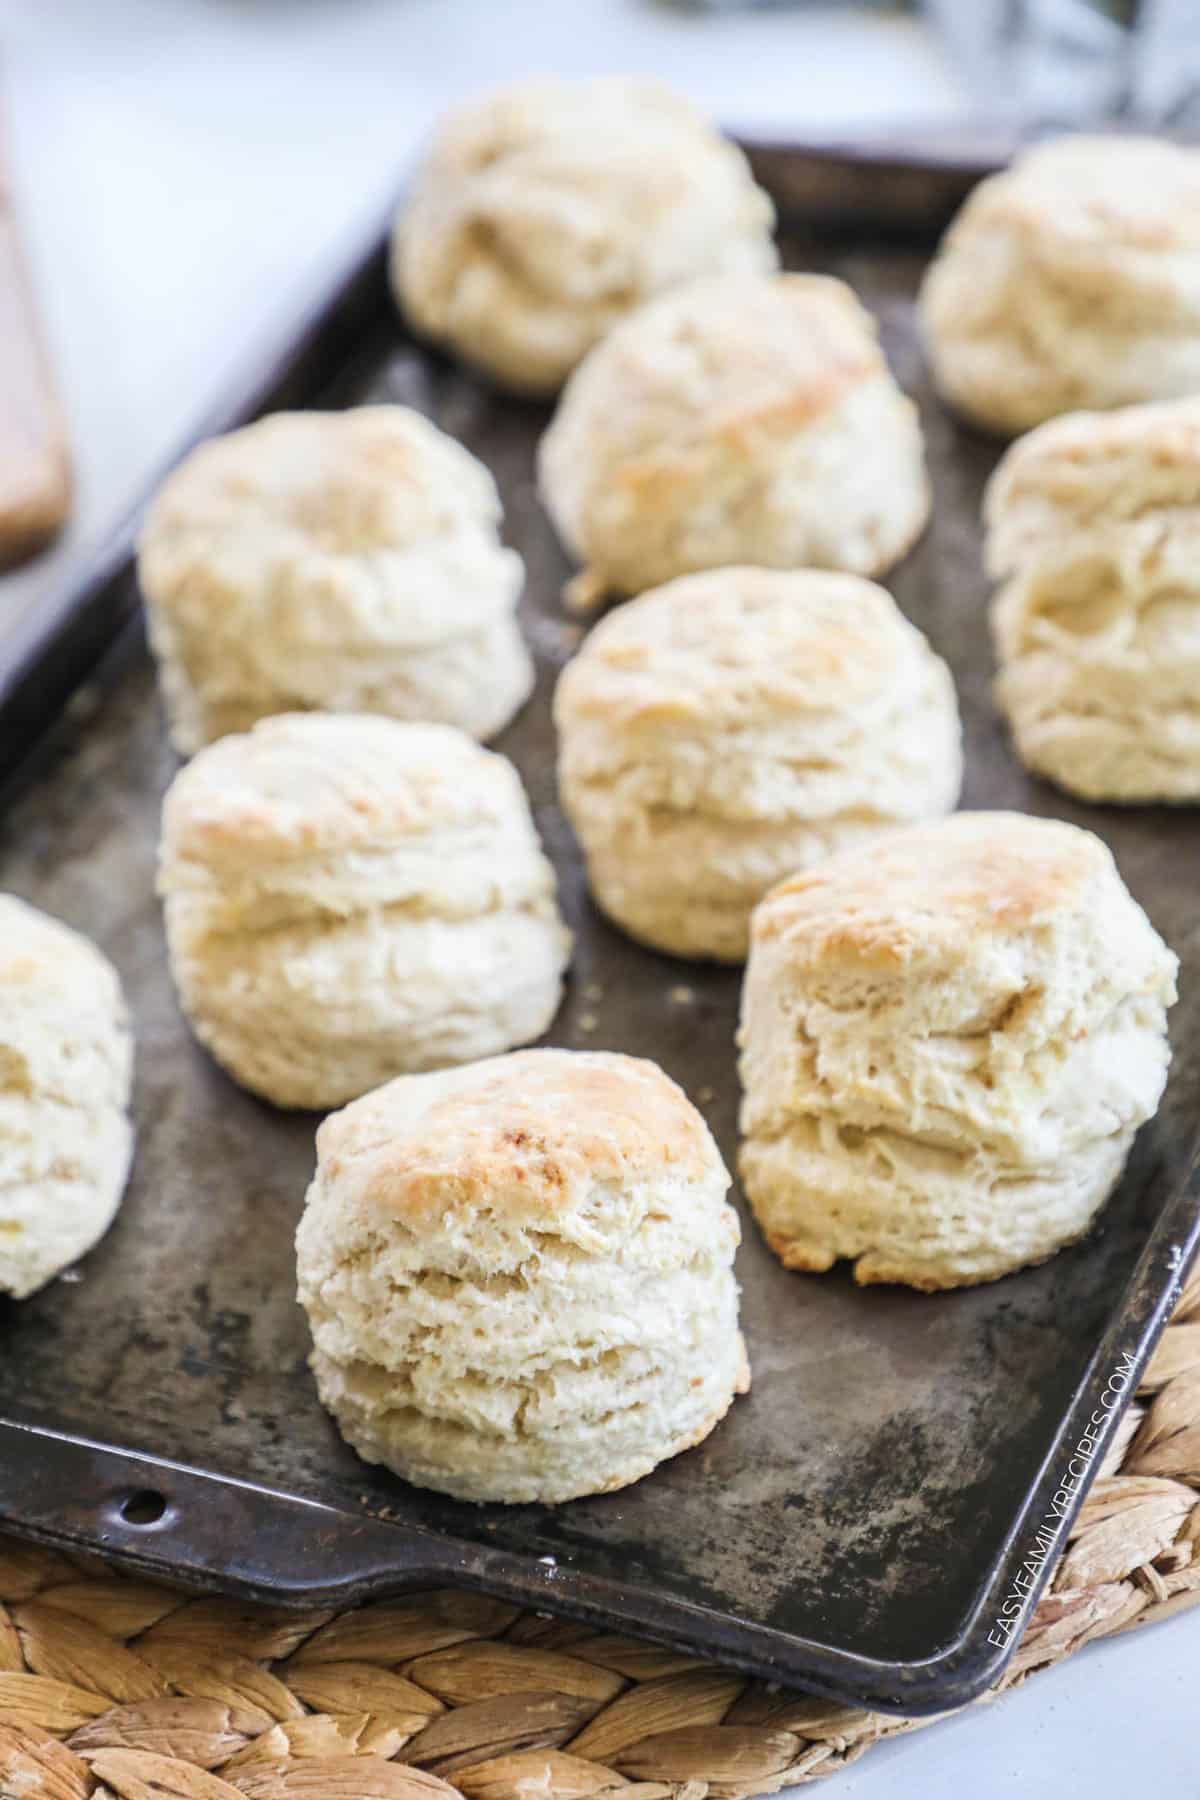 A pan of homemade biscuits made with homemade bisquick.